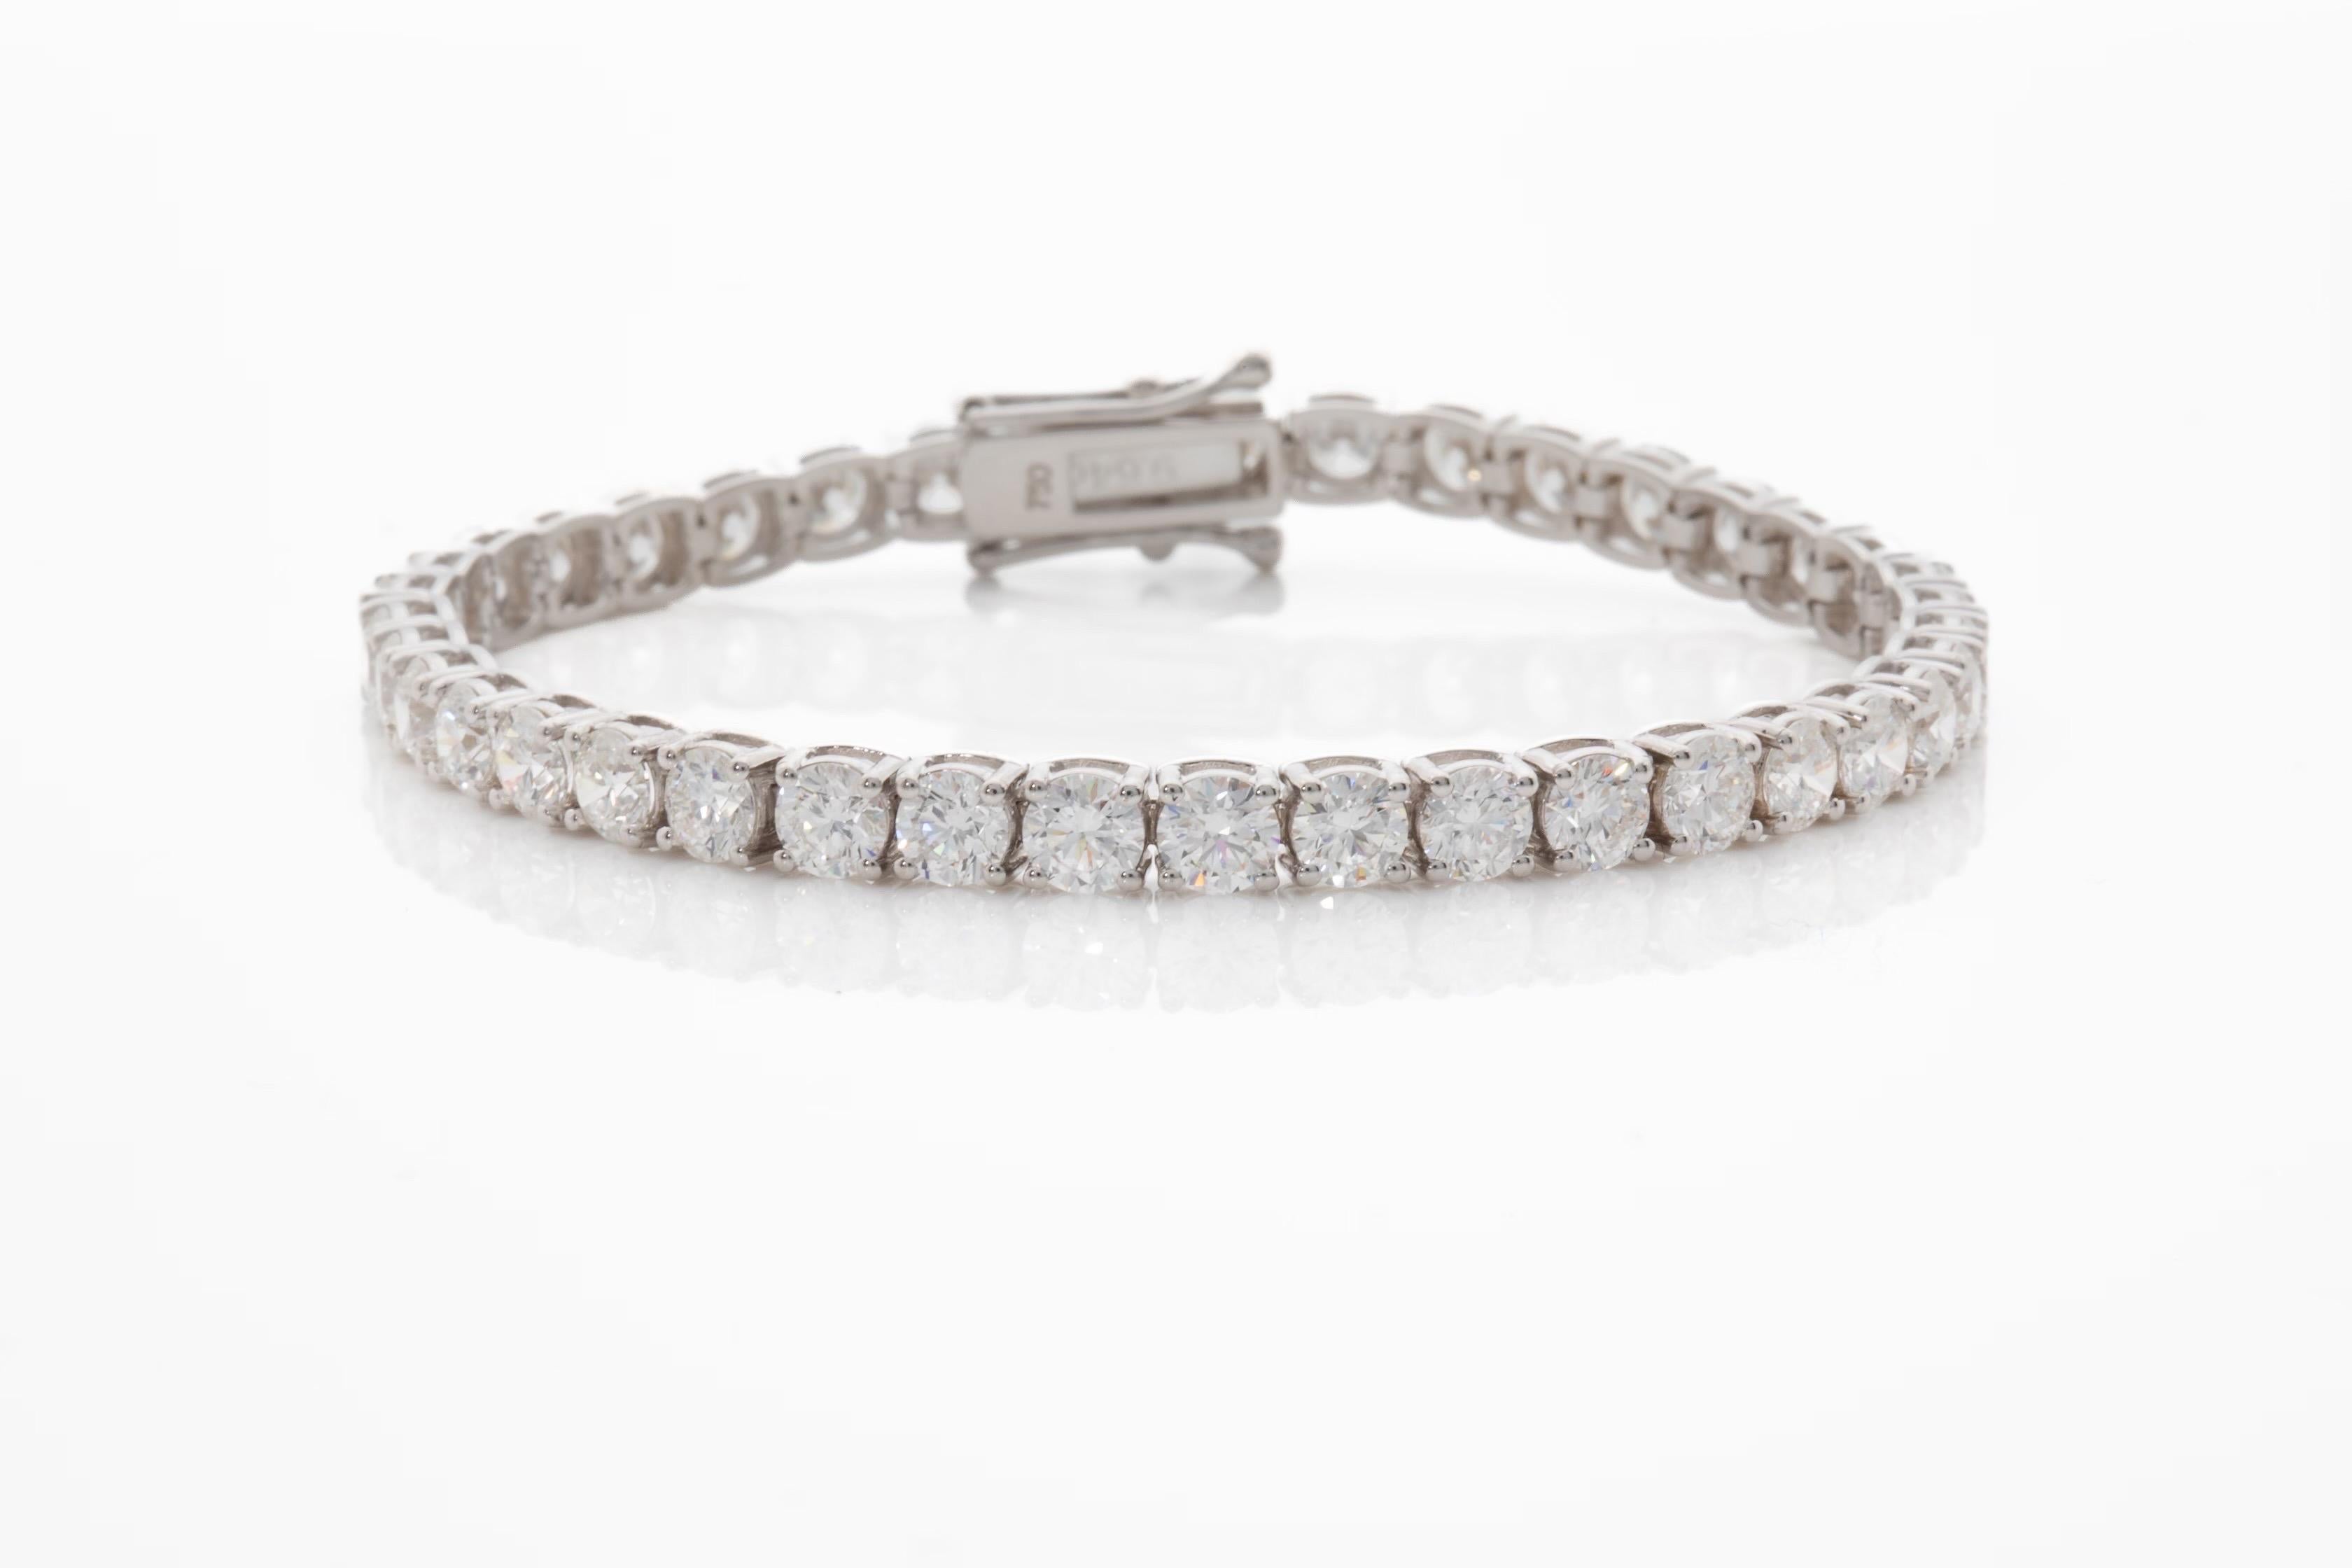 Handmade 18K White Gold Tennis Bracelet with 39 Round Brilliant cut diamonds D color VVS clarity DTW. 9.64ct, 6.5 inch, 12.41grams.

Viewings available in our NYC wholesale office by appointment only. 

Accredited appraisal from independent